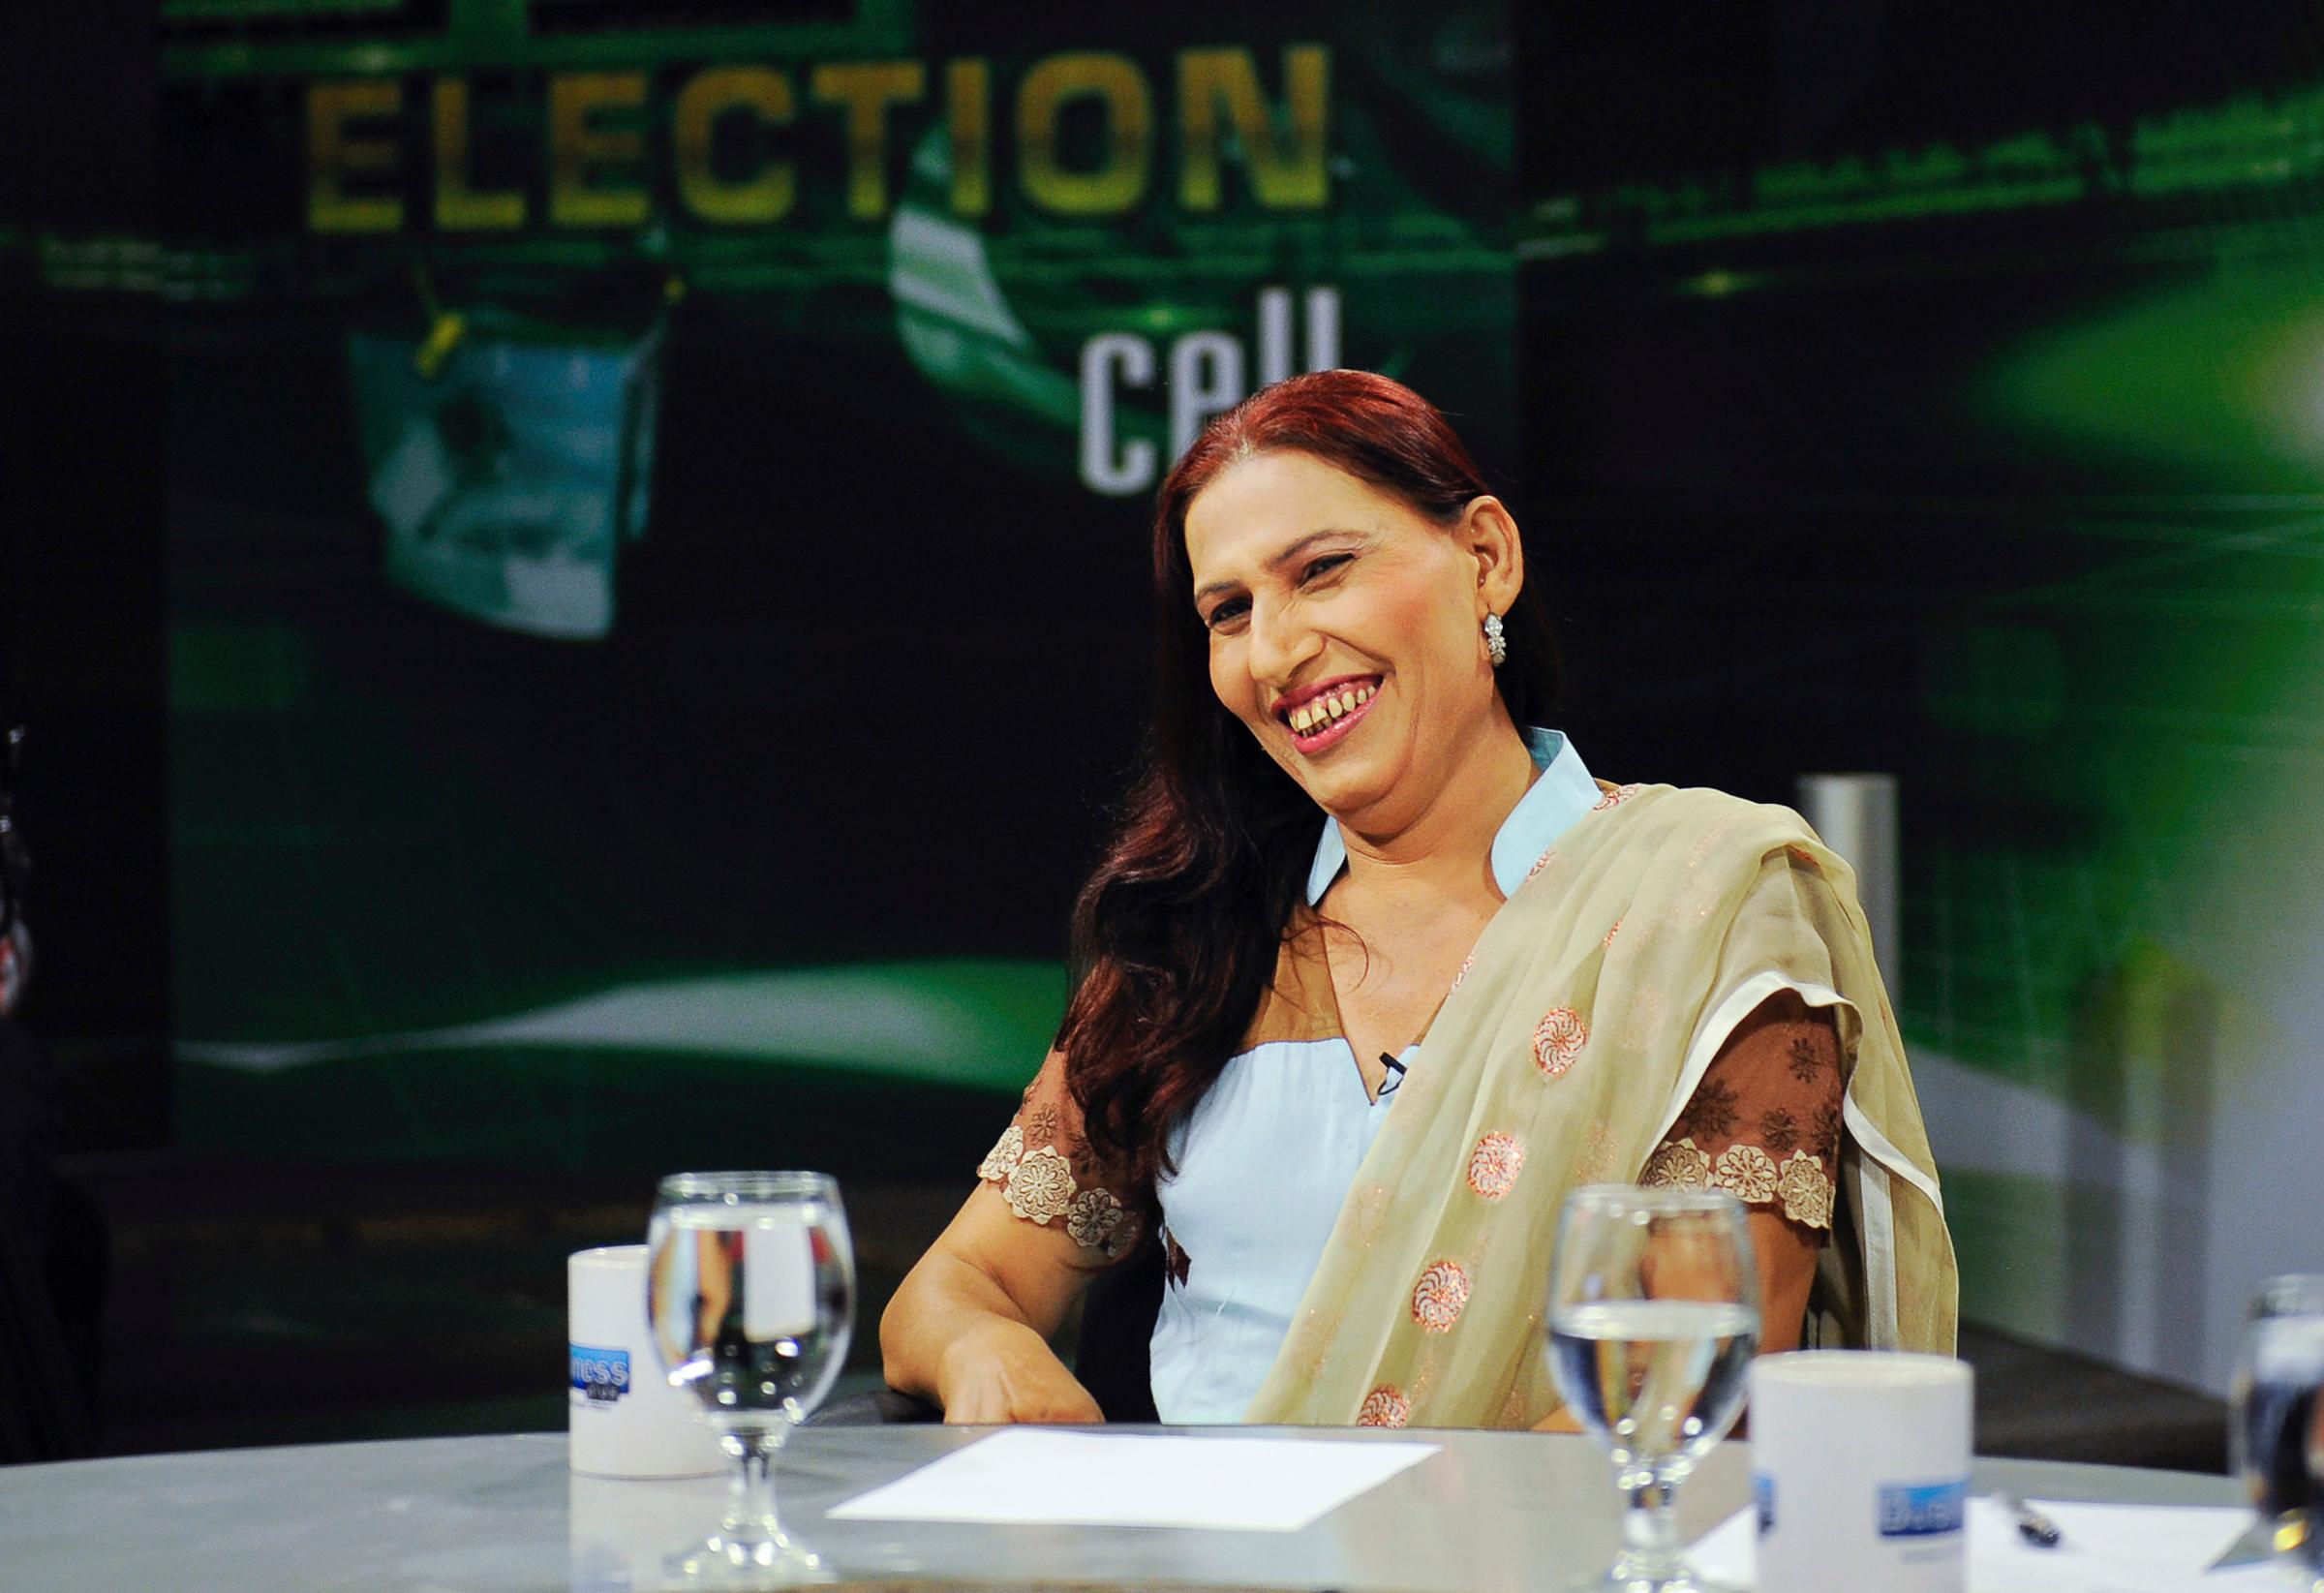 Rana, a transgender independent candidate for the upcoming elections, smiles during a local TV programme in Karachi